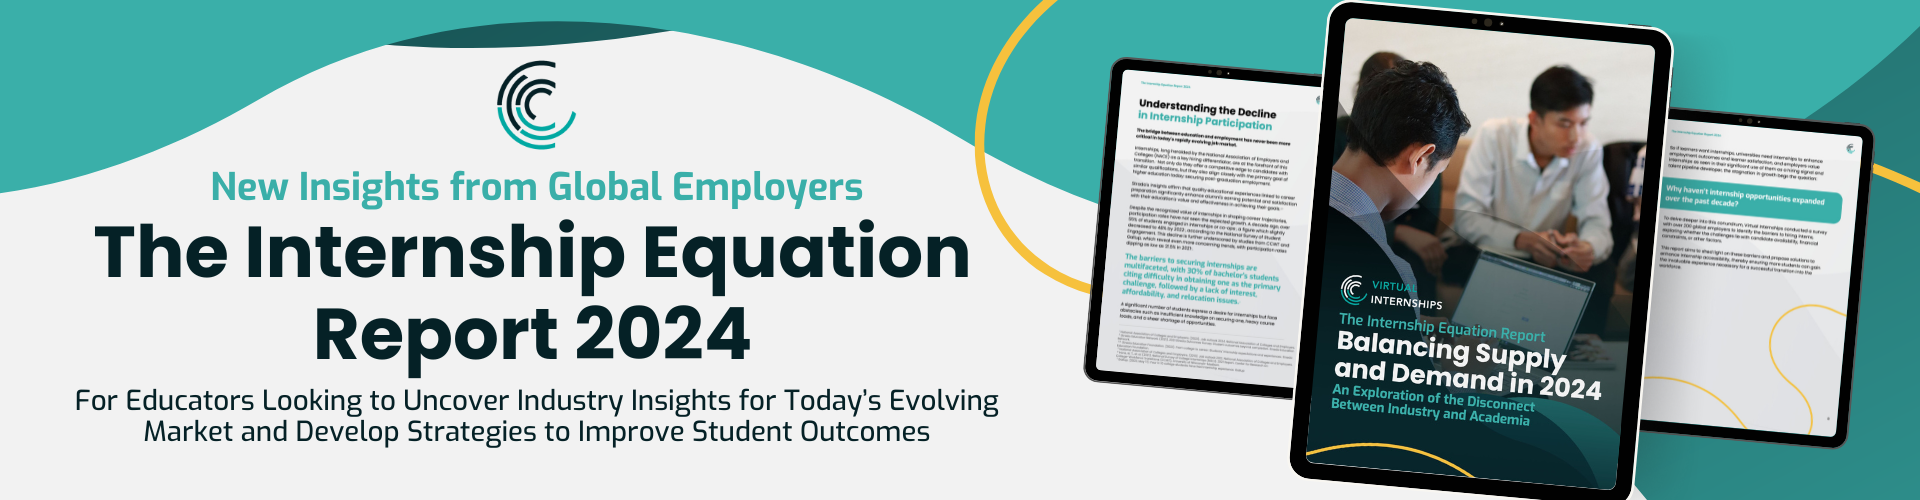 The Internship Equation Report - For Educators Looking to Uncover Industry Insights for Today’s Evolving Market and Develop Strategies to Improve Student Outcomes